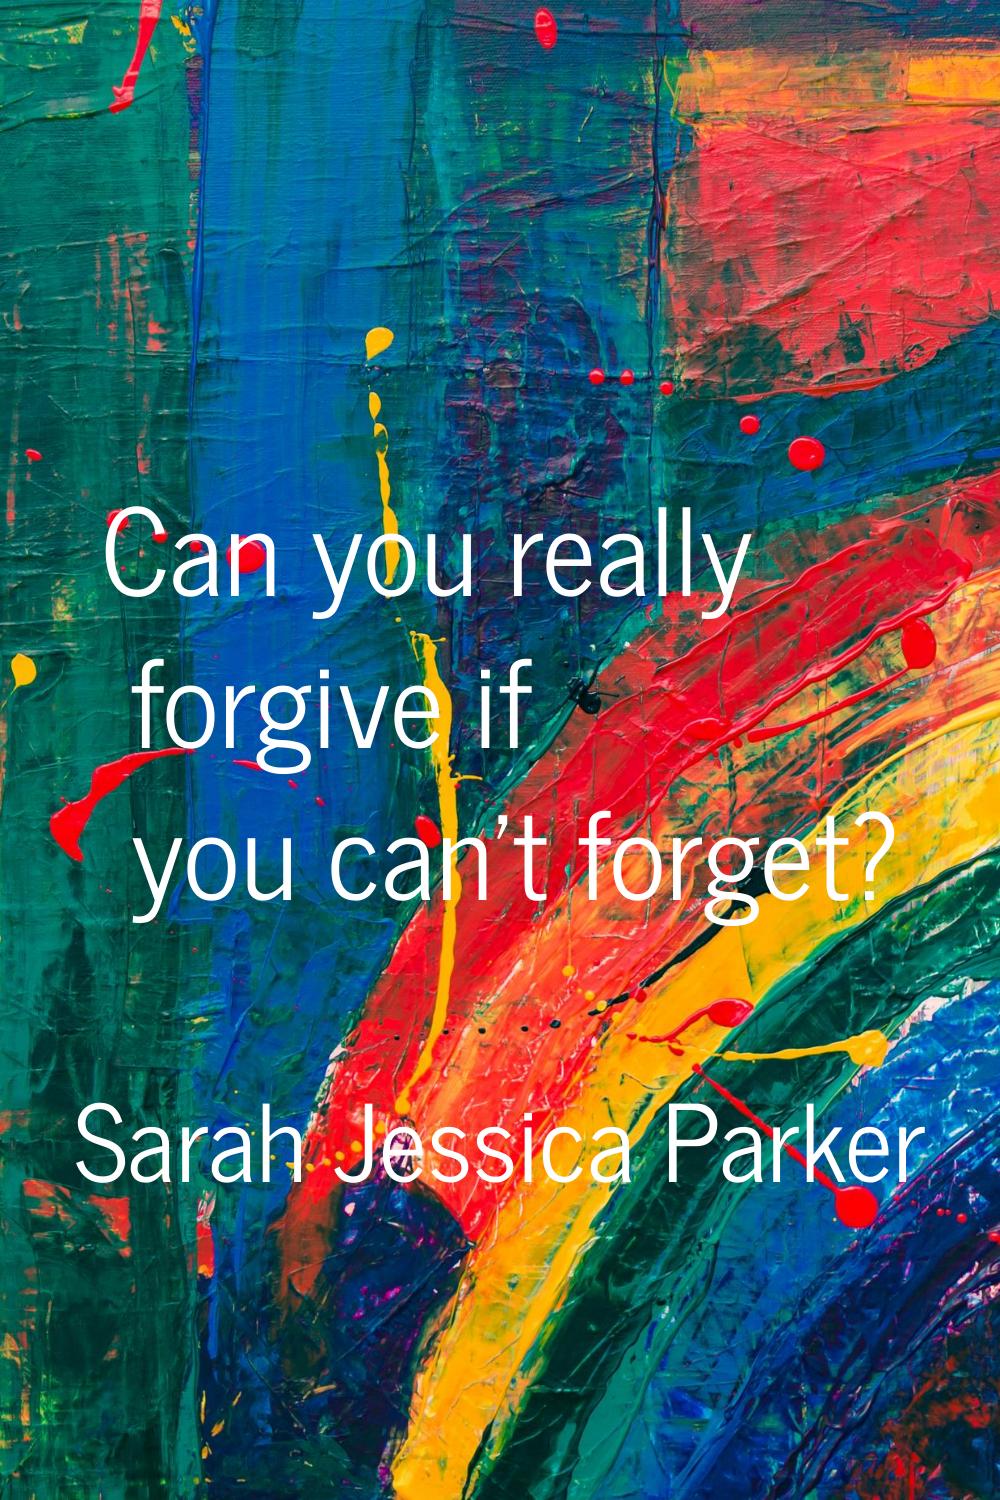 Can you really forgive if you can't forget?